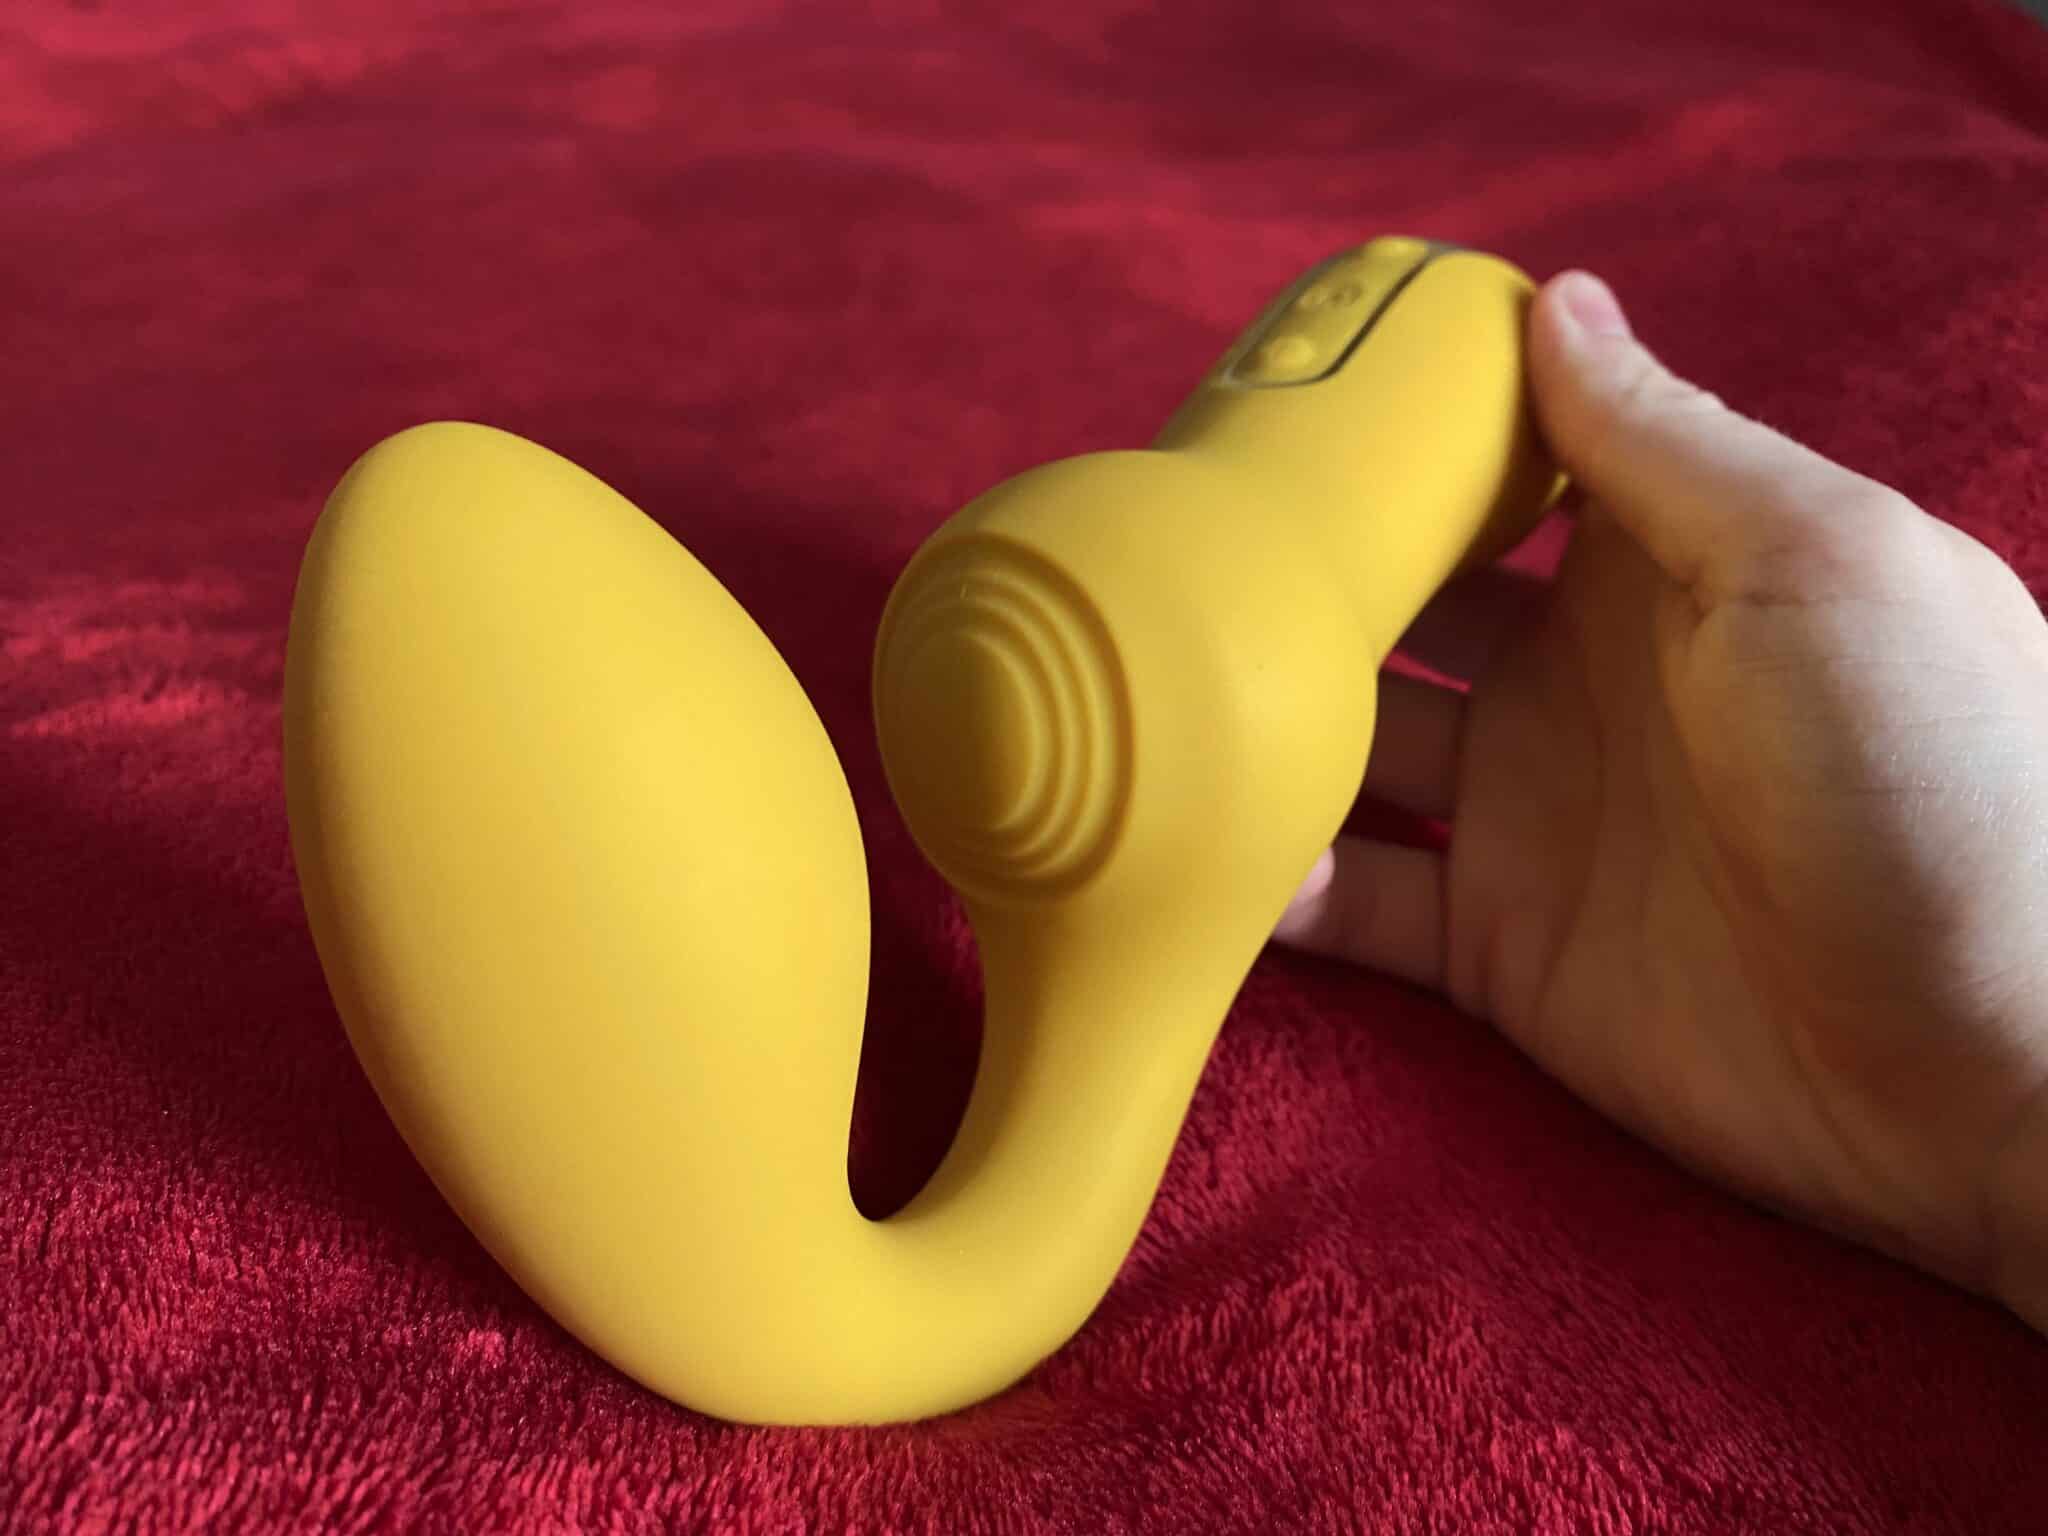 Your New Favorite Double Vibrator Is the price worth it?